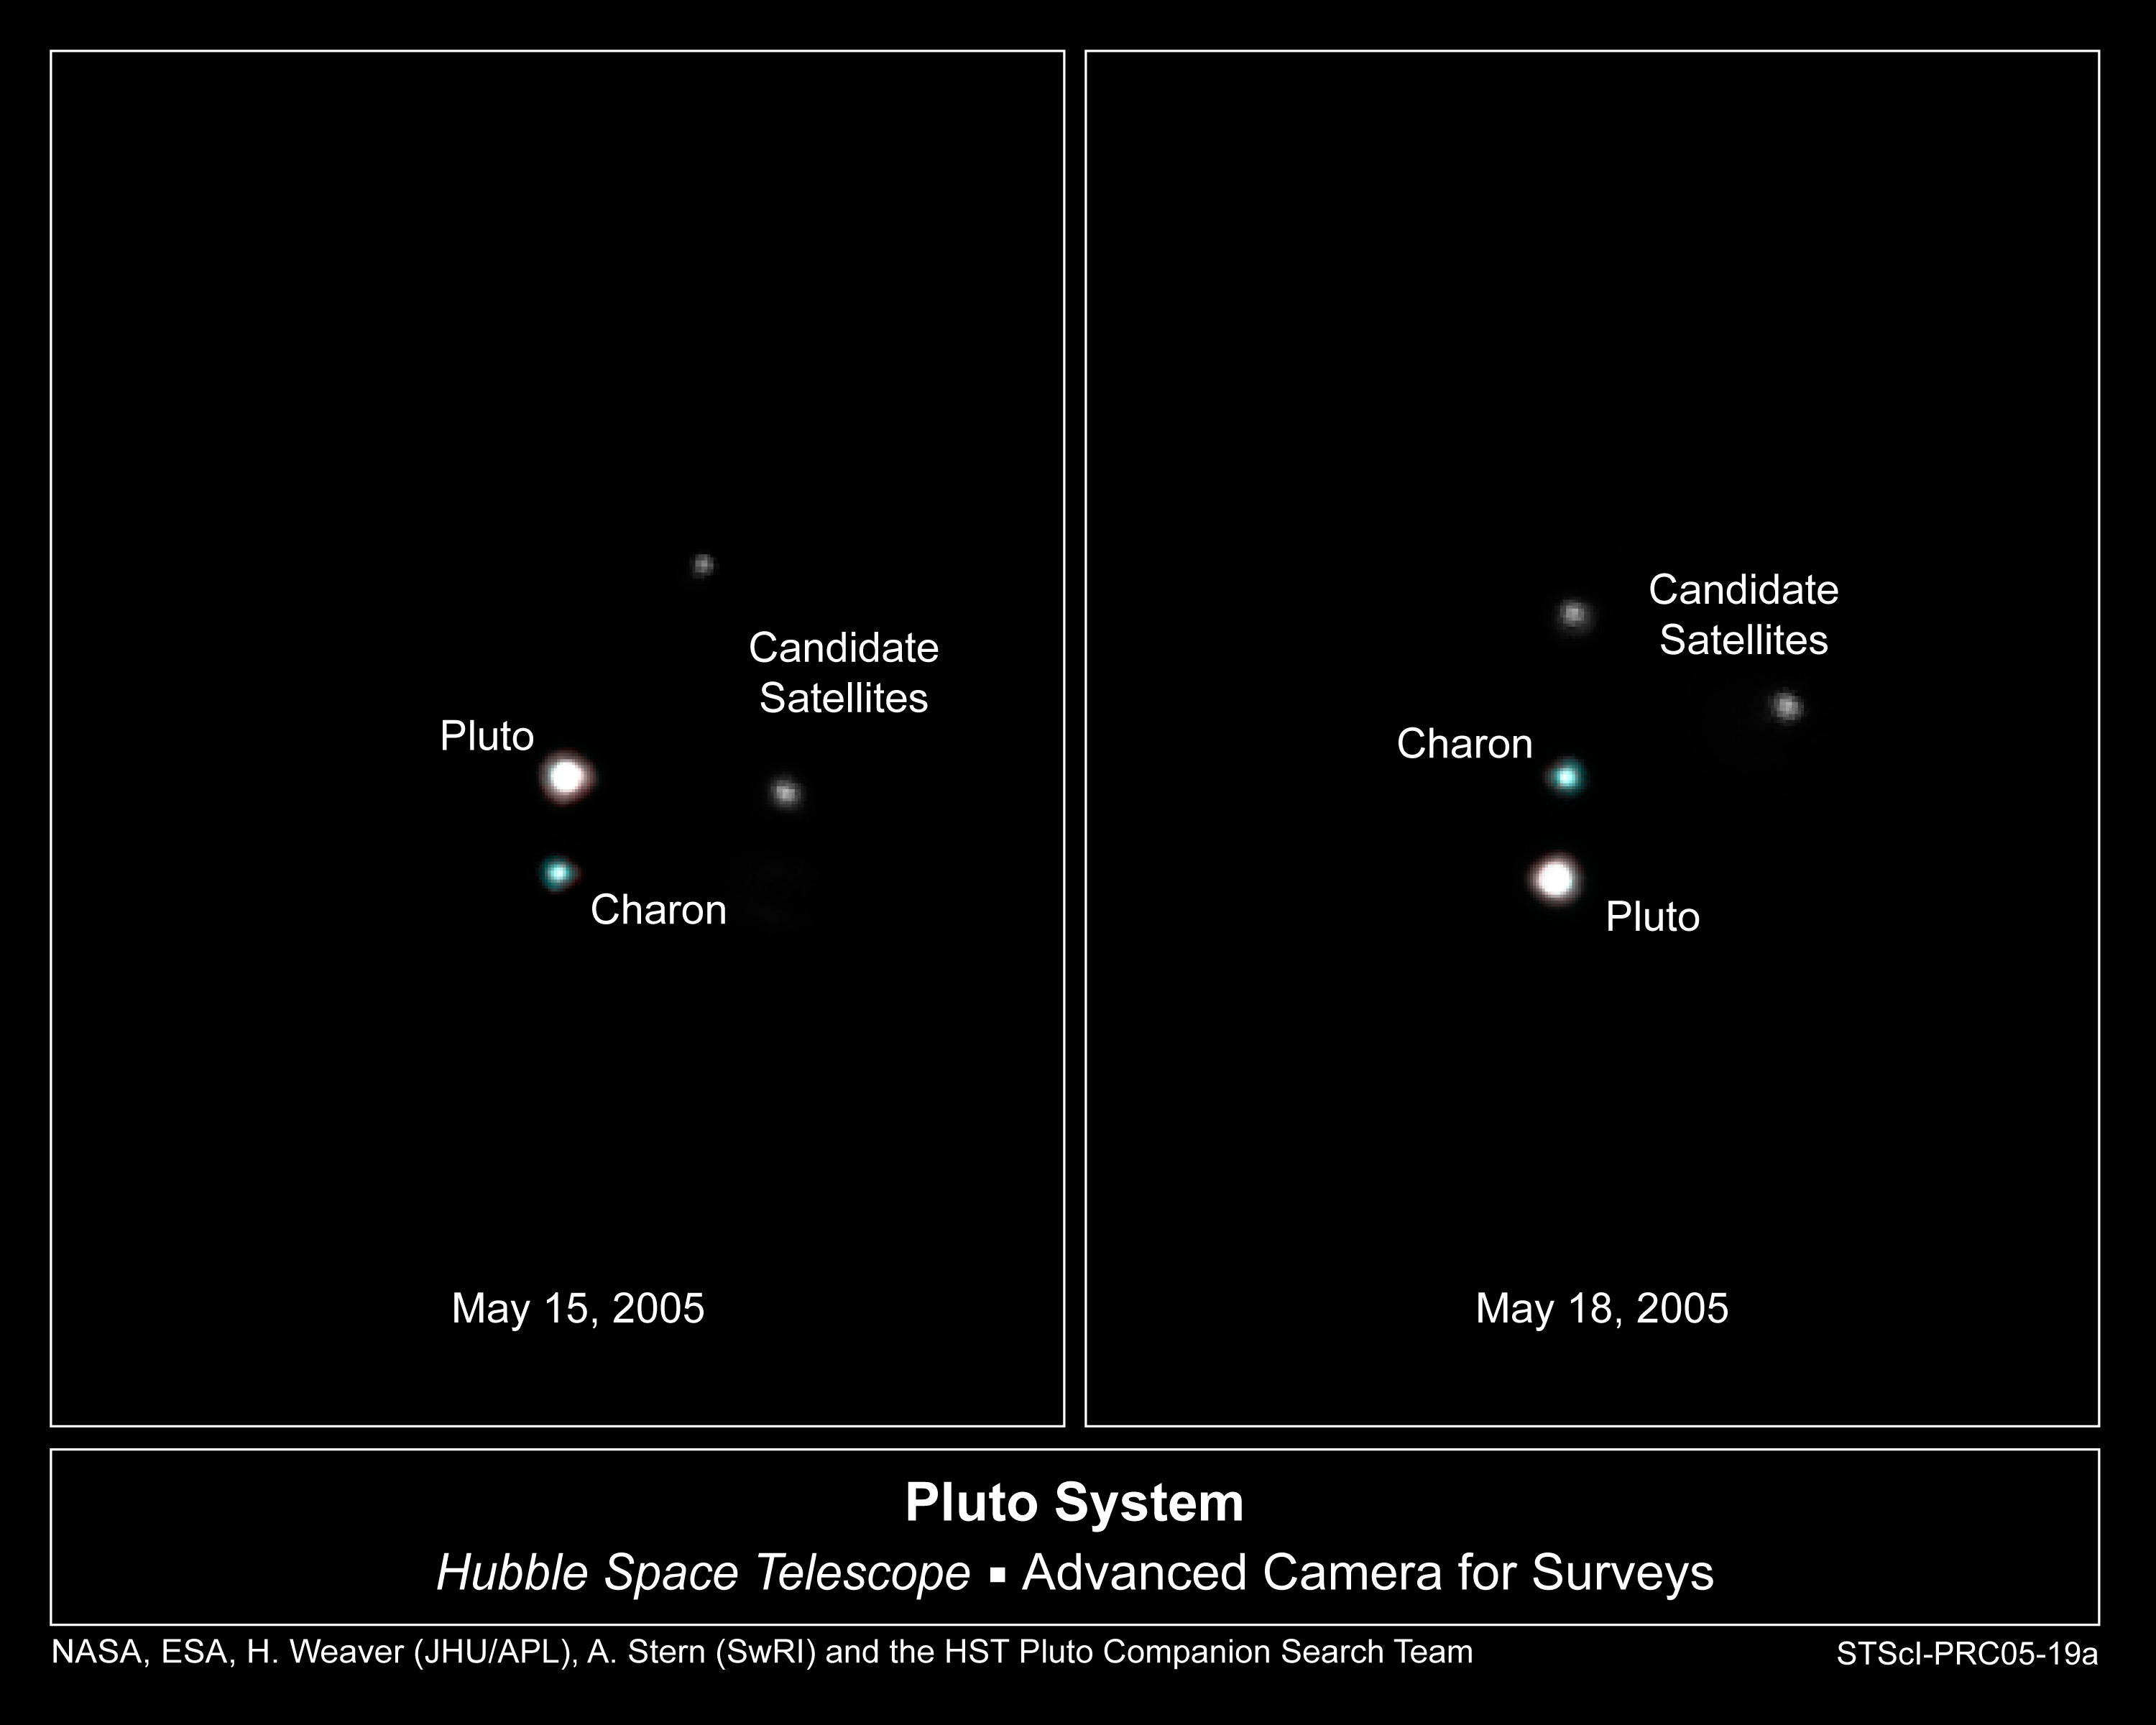 Two images: Left May 15, 2005. A white circle at image center is Pluto. Charon is below Pluto and aqua in color color. The two dots to the upper right of Pluto are the suspected moons. Right: May 19, 2005. Charon is now above Pluto. The two suspected moons have also moved above Pluto.